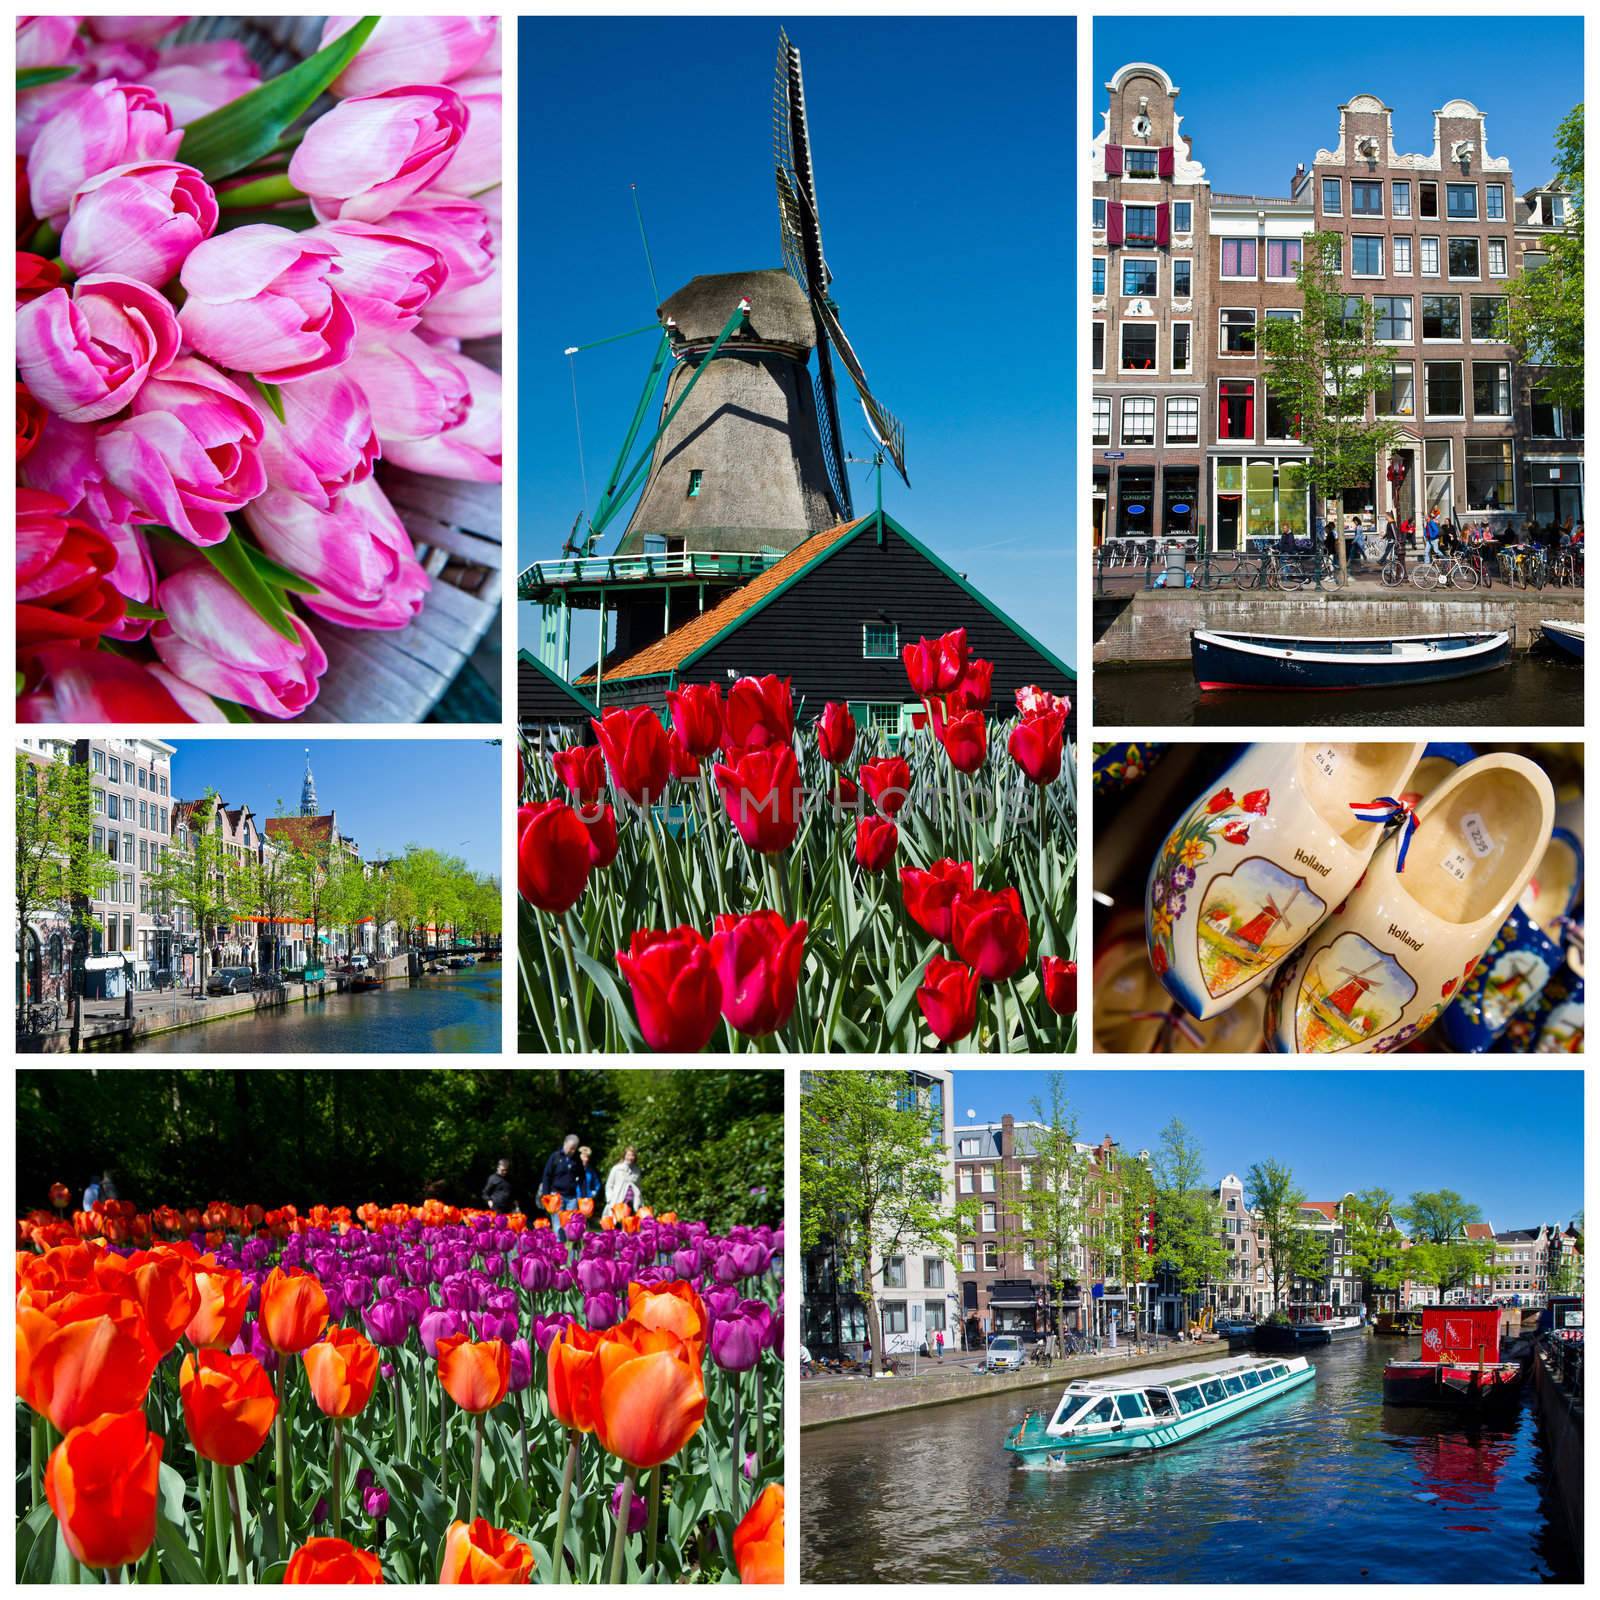 holland collage by lsantilli